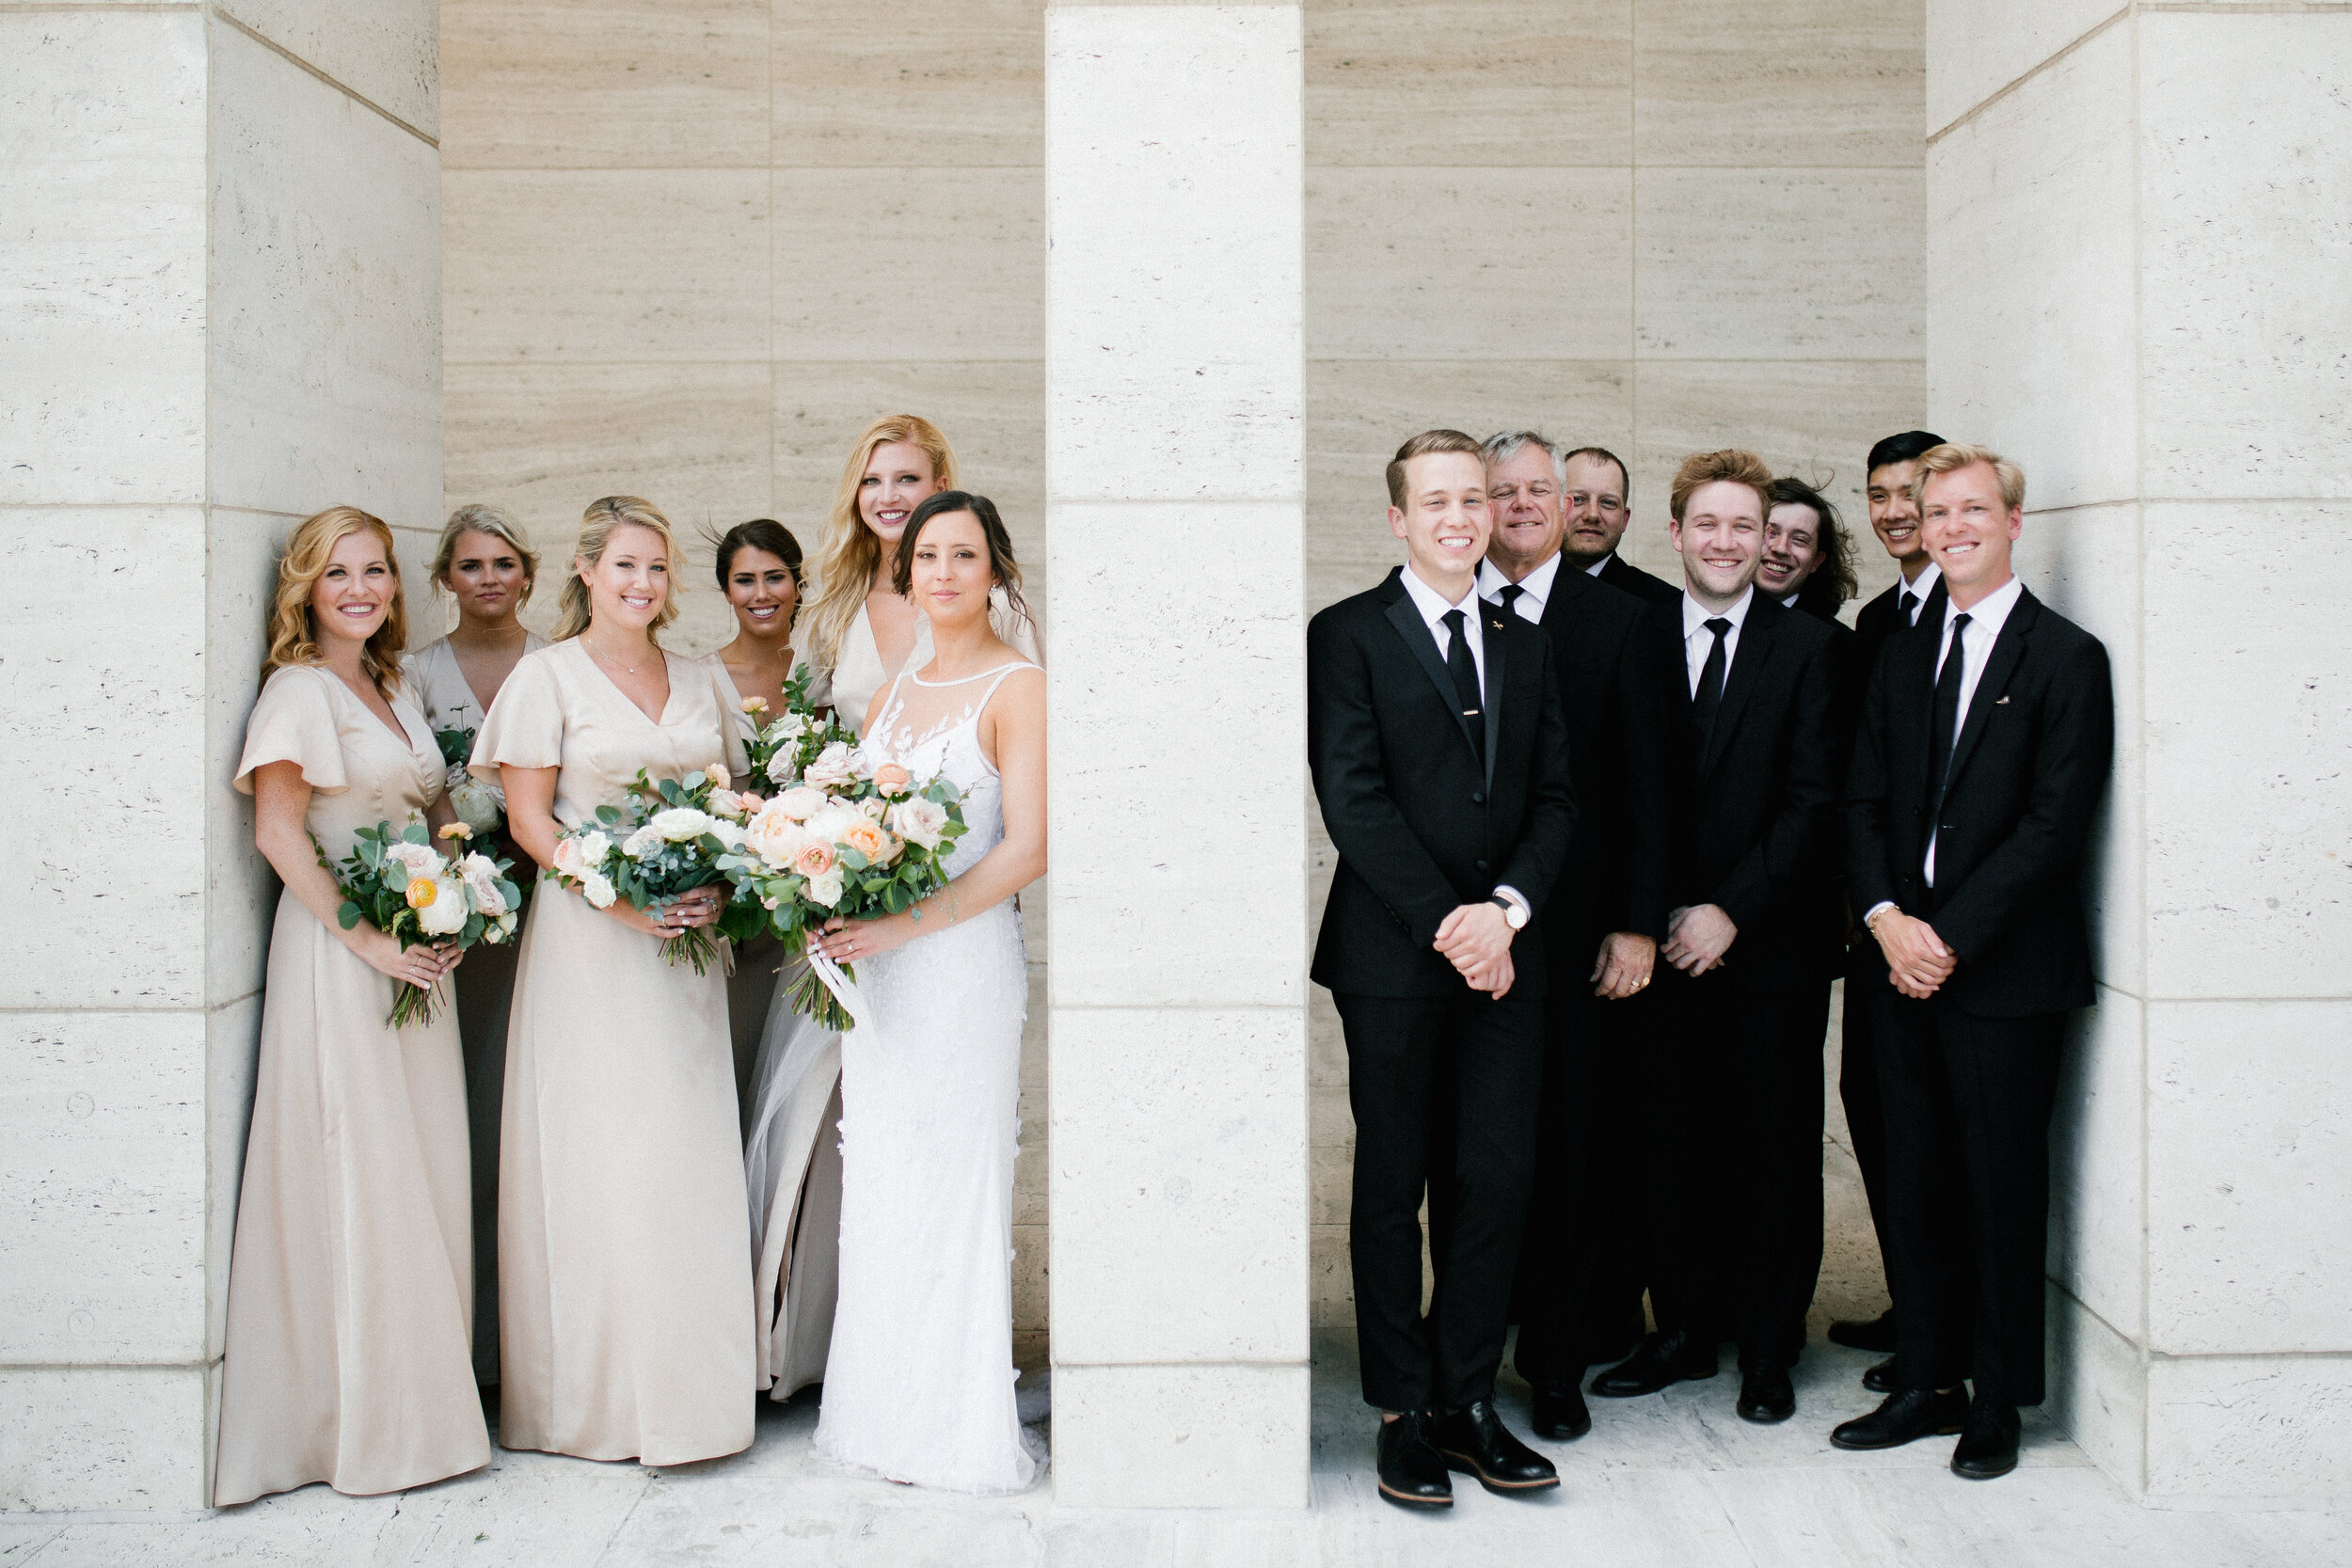 Bridal party portraits at Tennessee Tower in downtown Nashville. Asymmterical, whimsical bouquets with garden roses, ranunculus, and greenery.